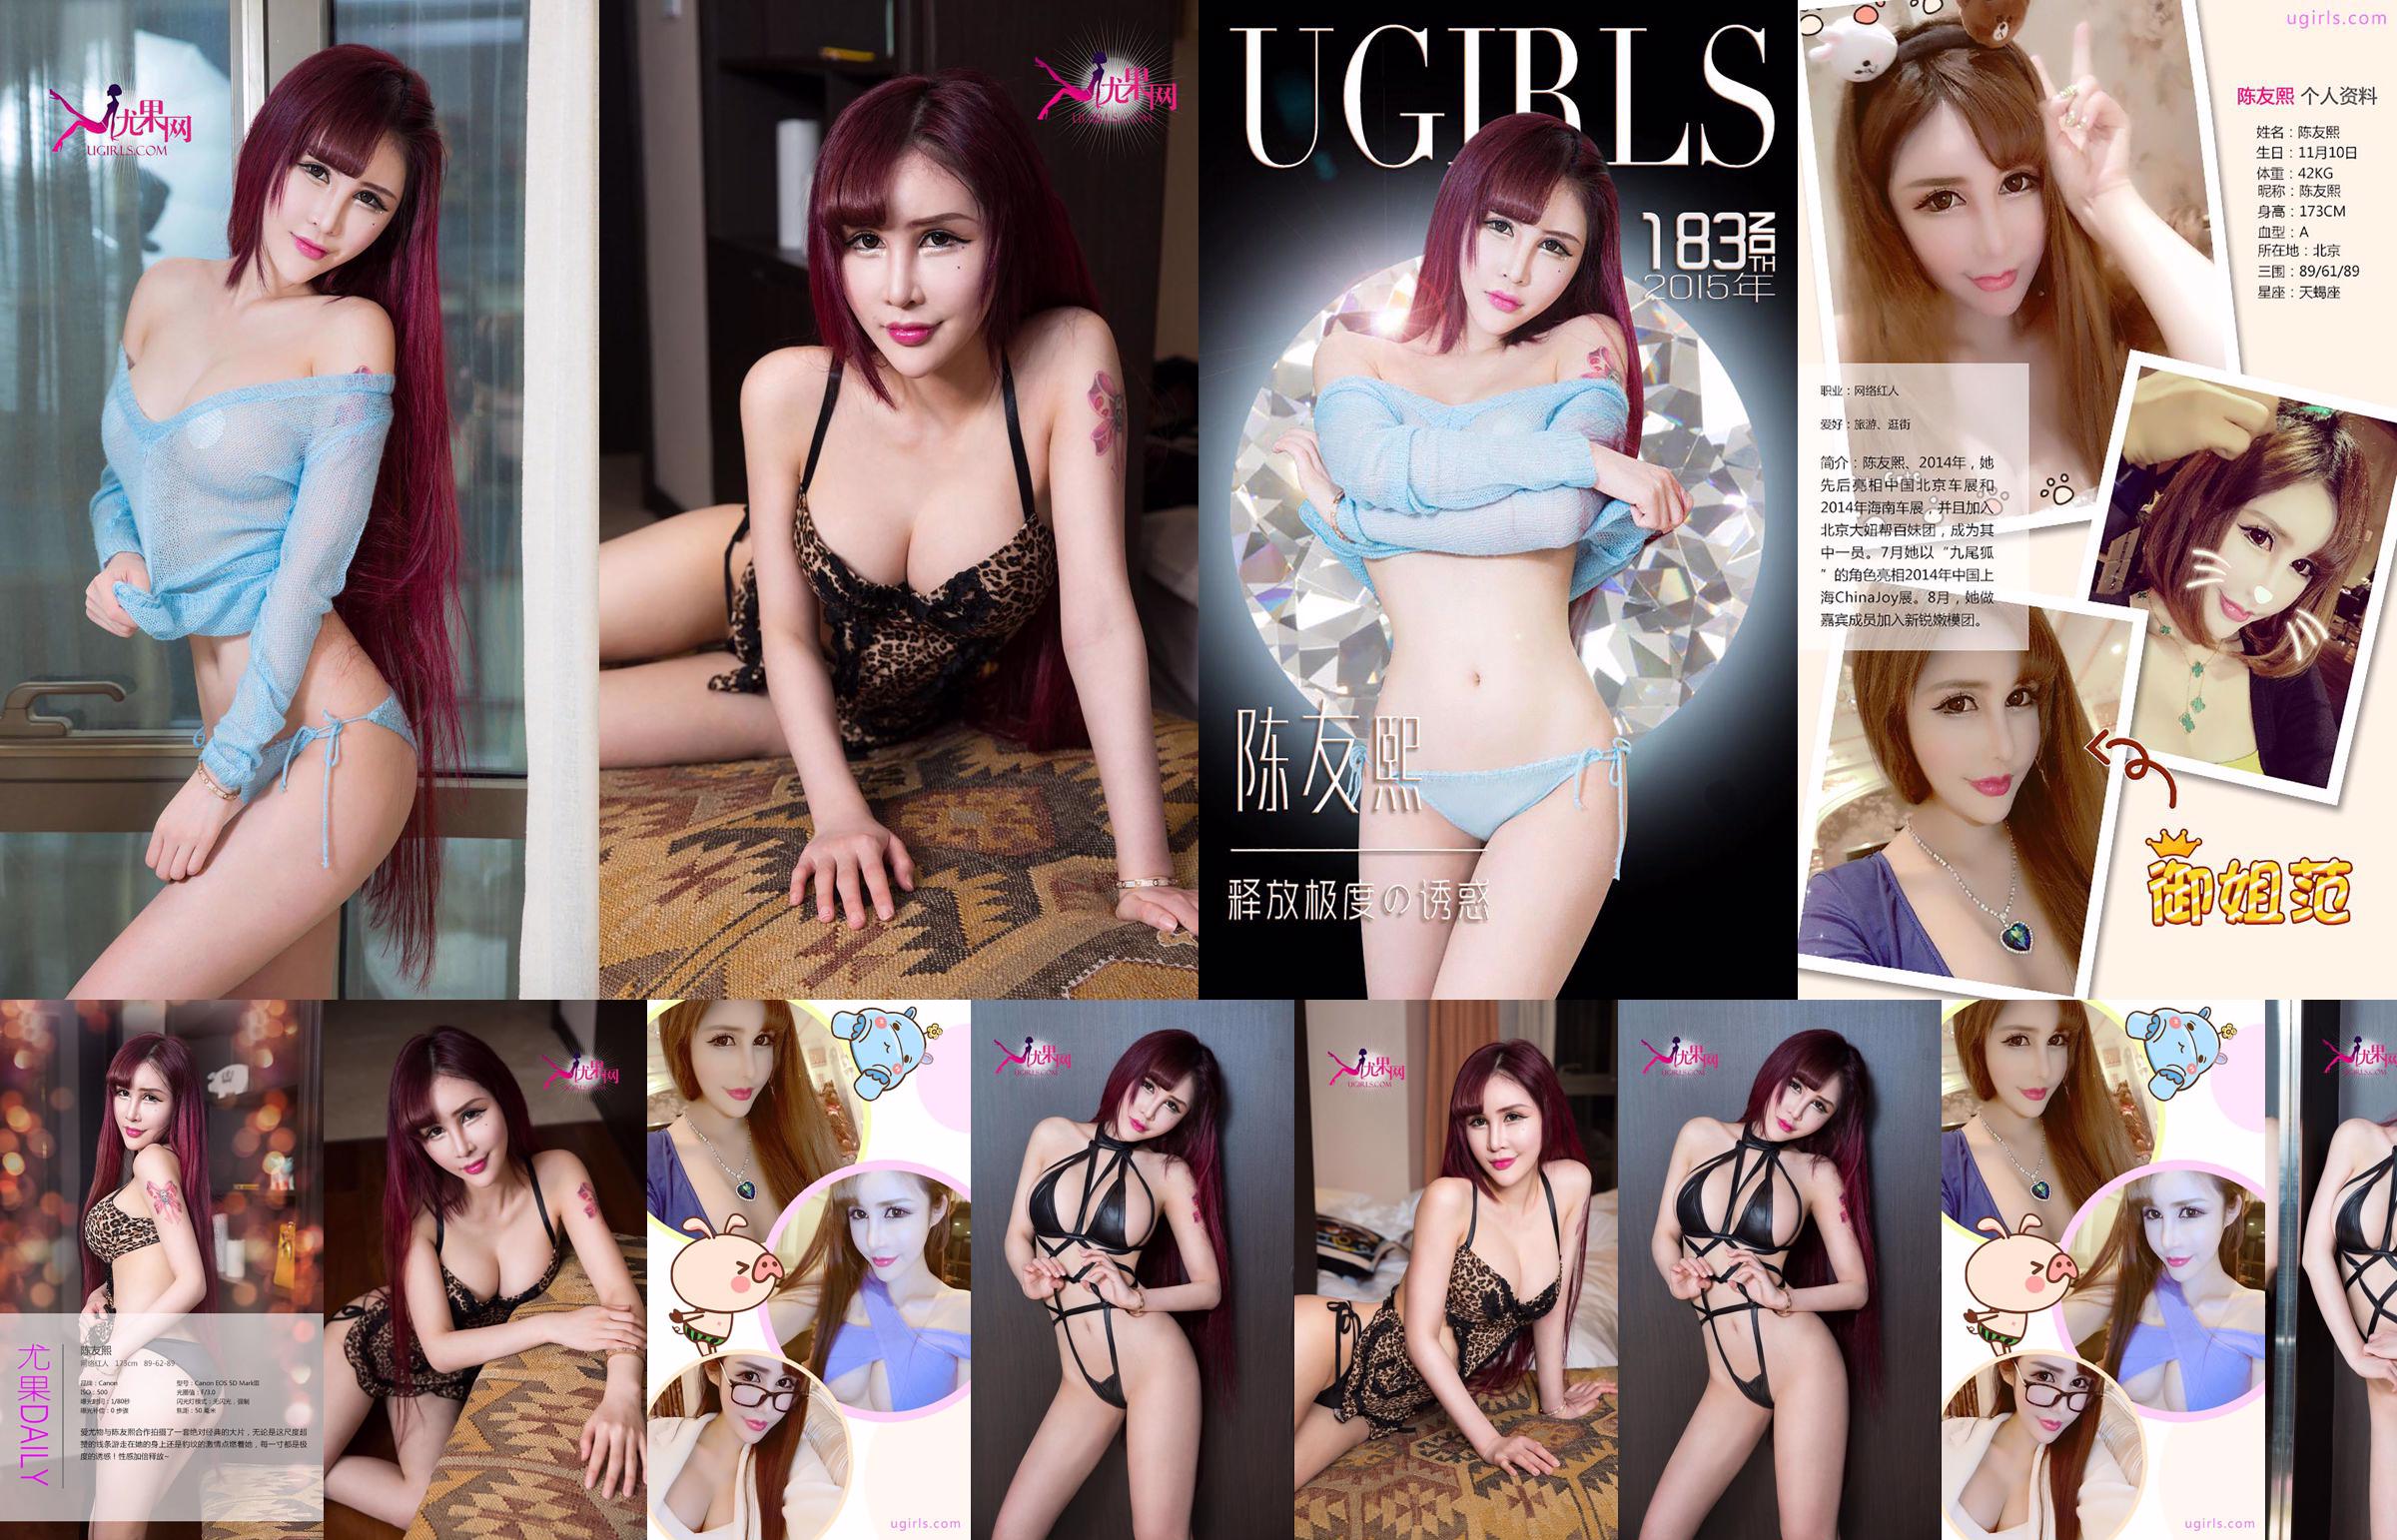 Chen Youxi "Release the Temptation of Jealousy" [爱优物Ugirls] No.183 No.3288ba Page 2